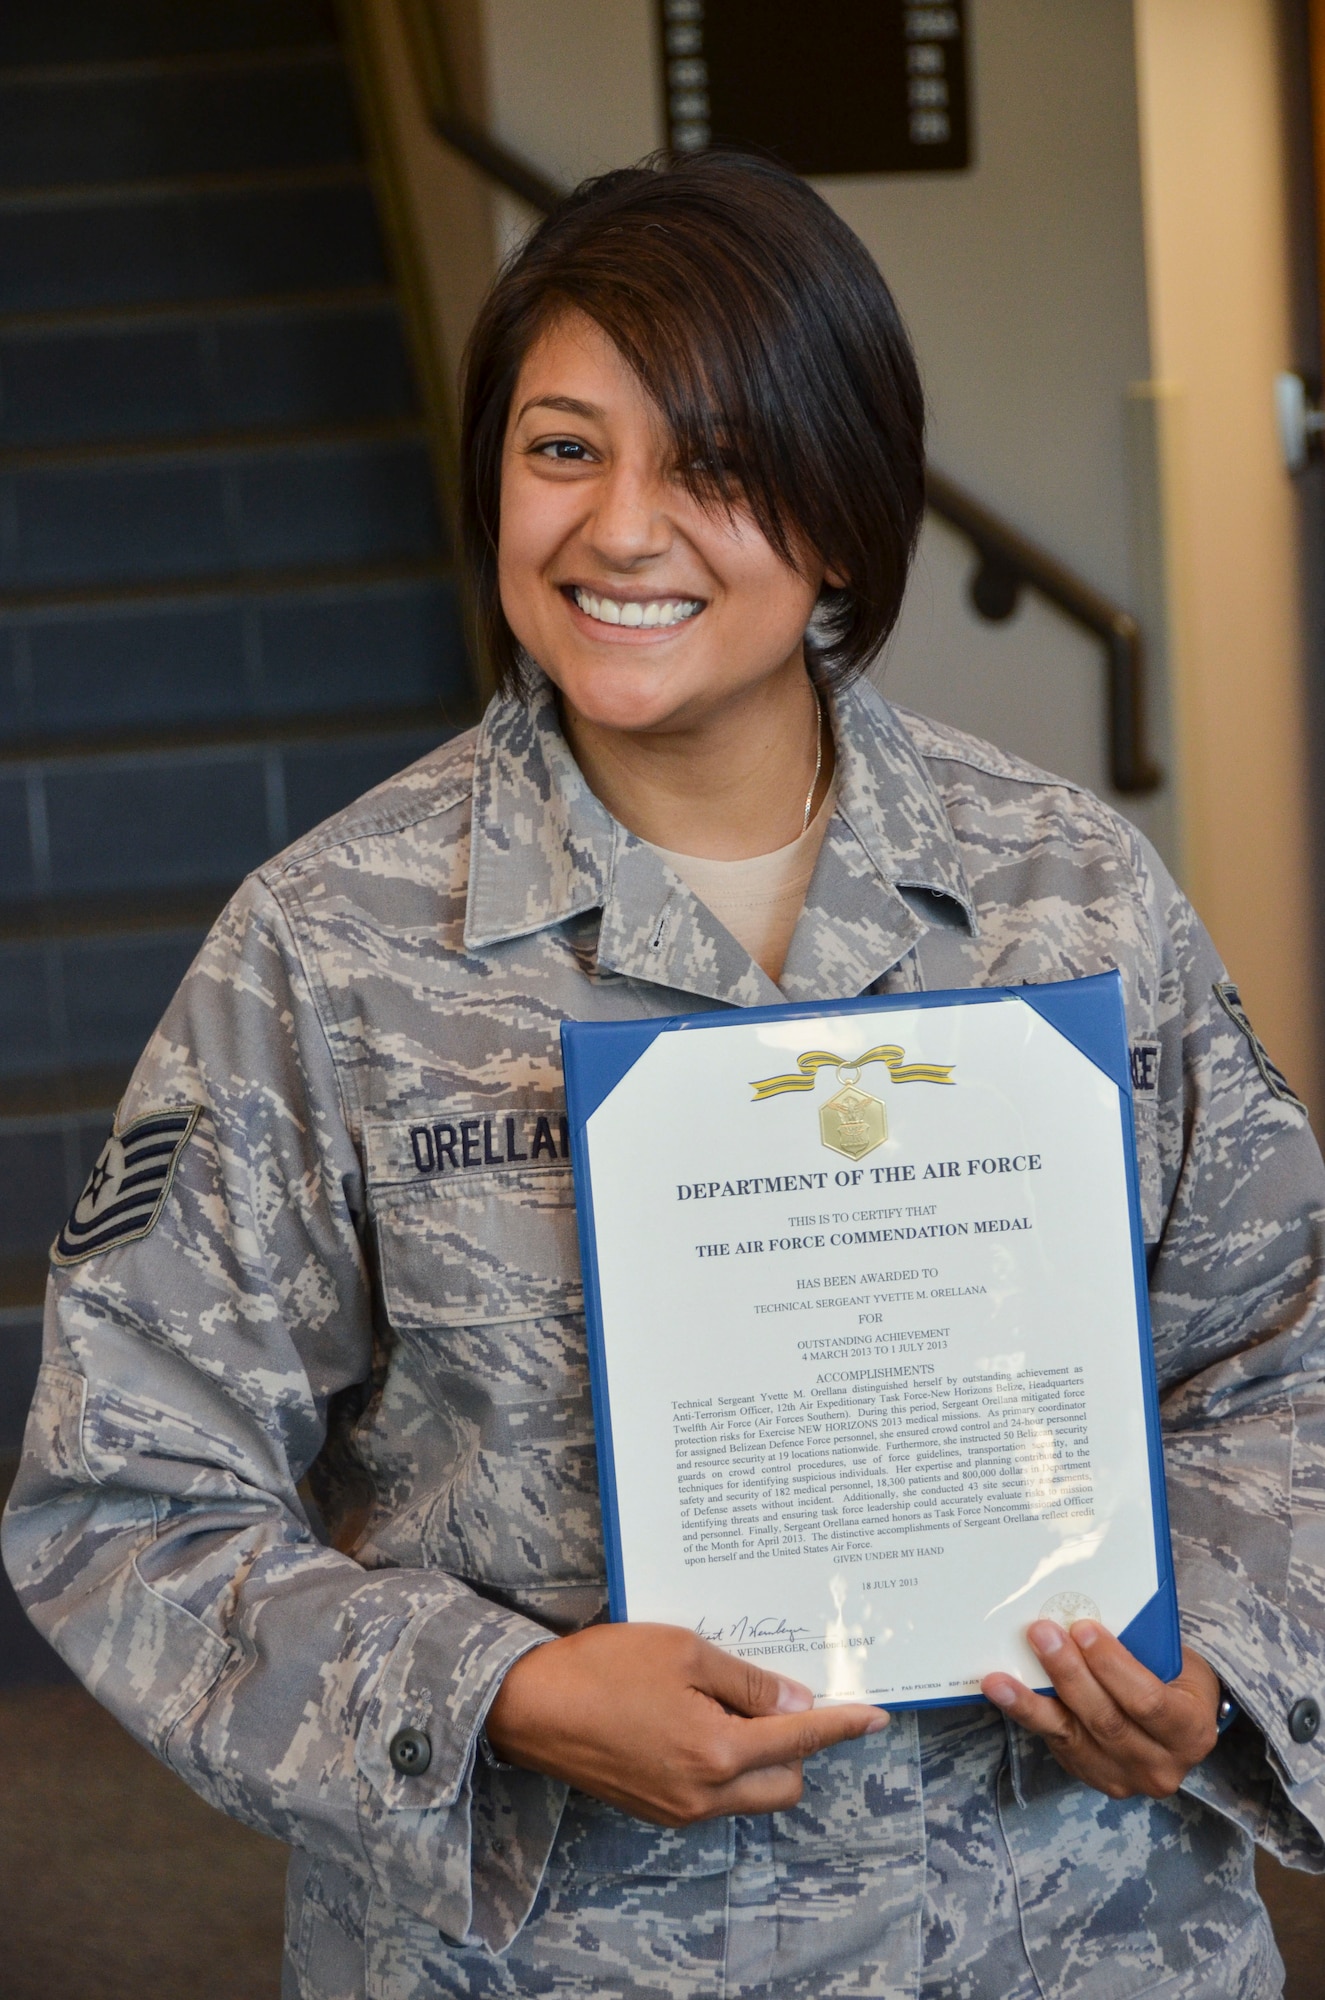 Tech Sgt. Yvette Orellana, 12th Air Force (Air Forces Southern) Force Protection Office, smiles after receiving an Air Force Commendation medal at Davis-Monthan Air Force Base, Ariz., Sept. 20, 2013. Orellana is receiving her Commendation medal for her accomplishments while serving as the Anti-Terrorism Officer for the 12th Air Expeditionary Task Force-New Horizons Belize, Headquarters 12th Air Force (Air Forces Southern). (U.S. Air Force photo by Staff Sgt. Adam Grant/Released